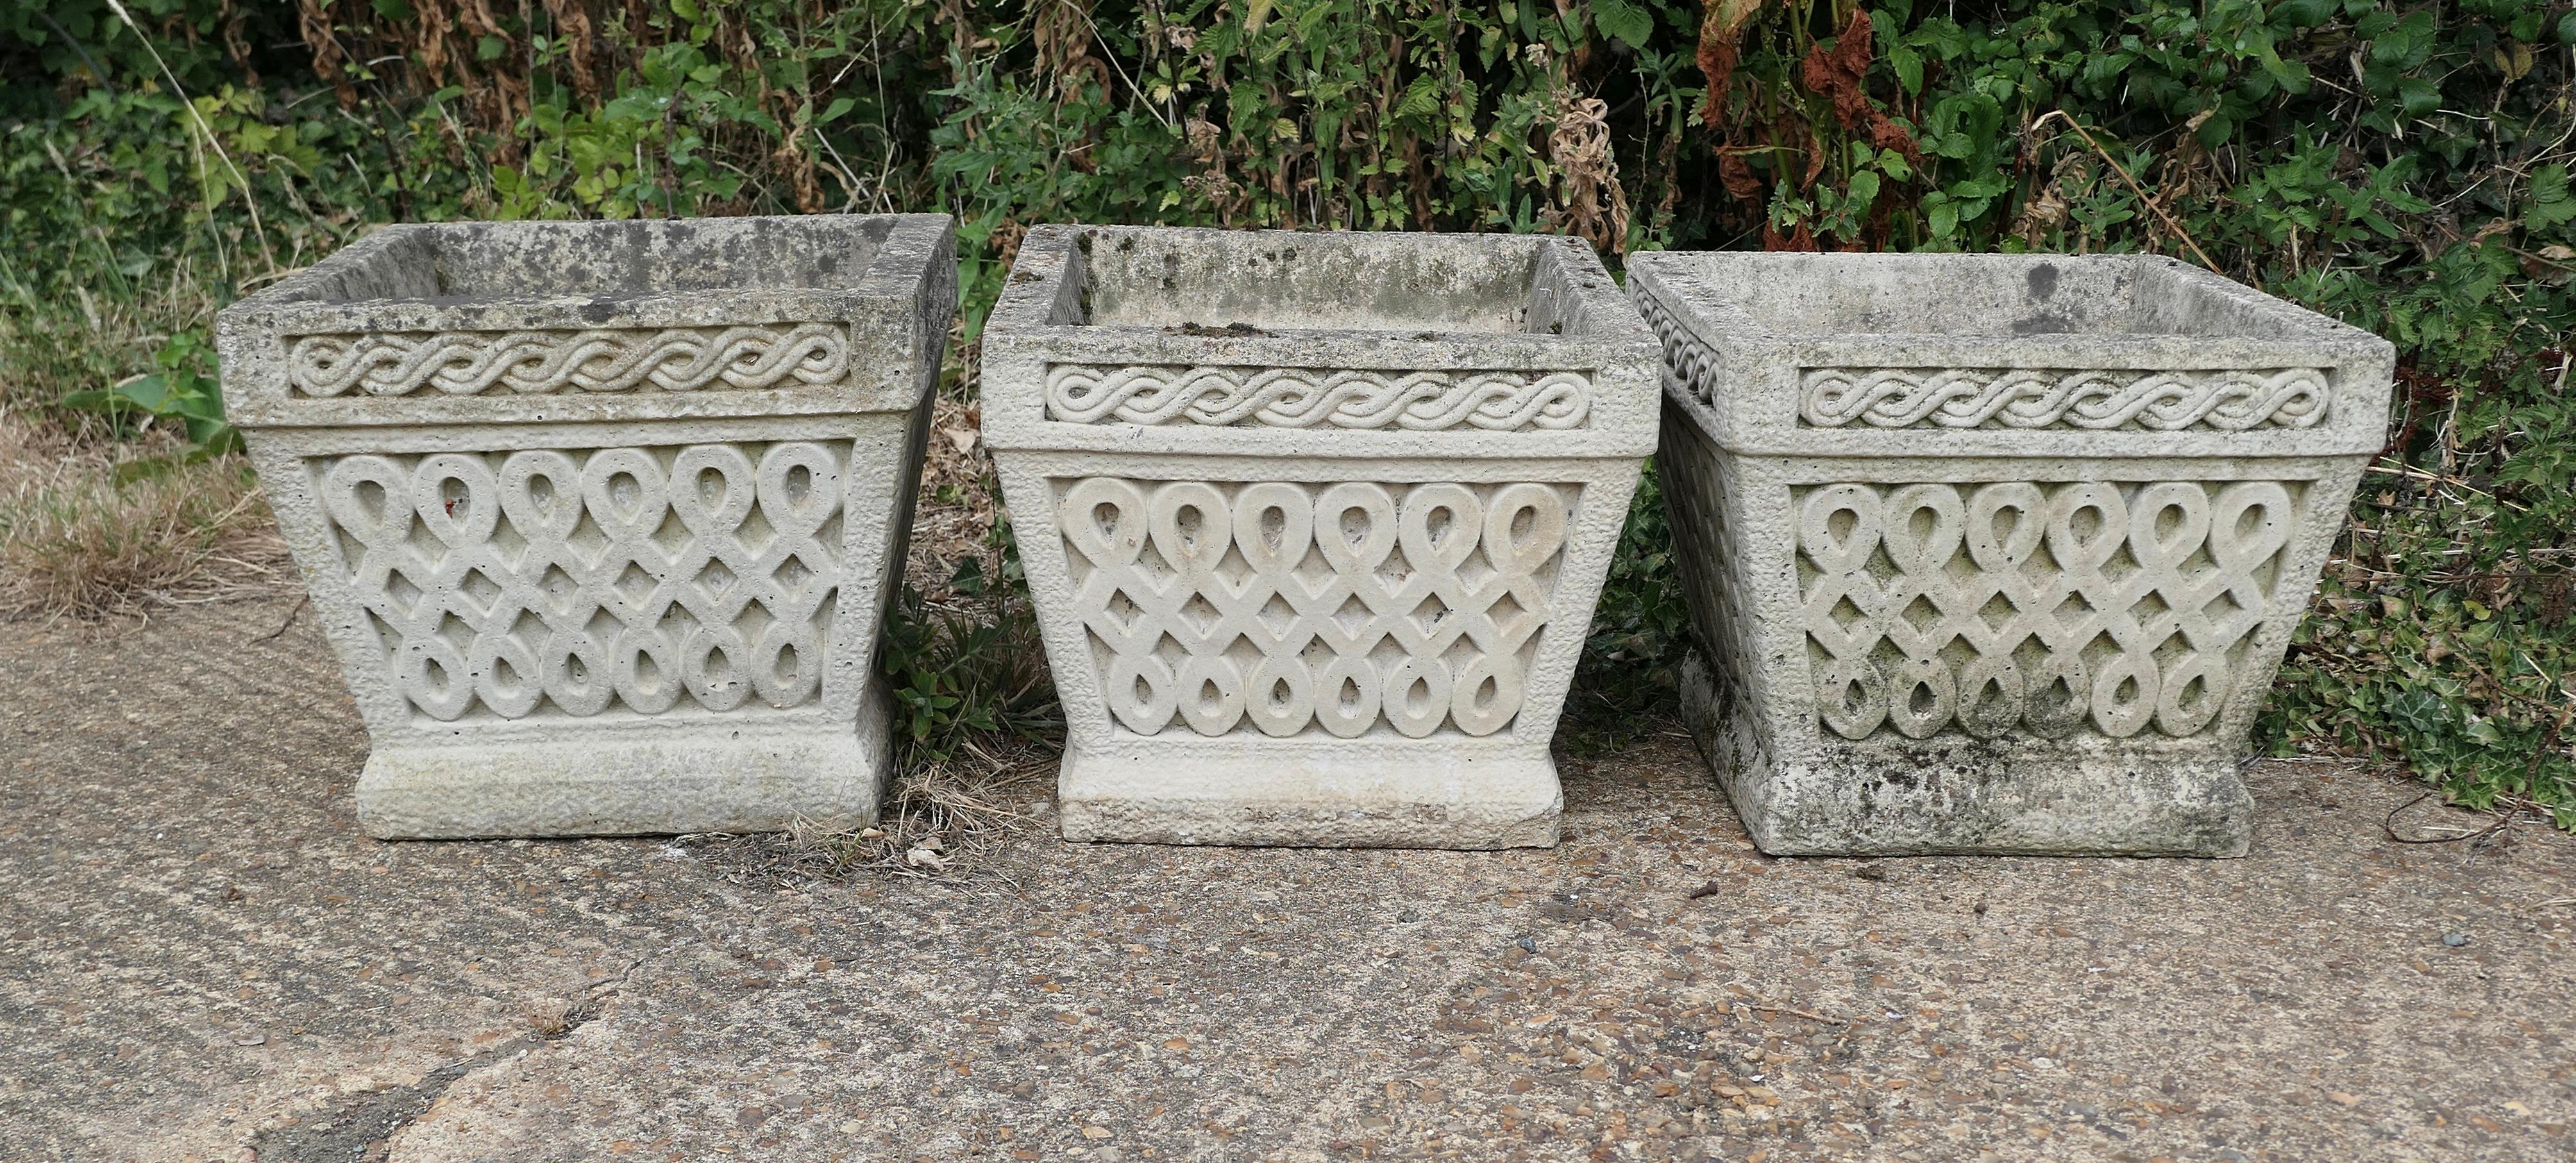 Set of 6 Classical Basket Weave Garden Planters For Sale 1